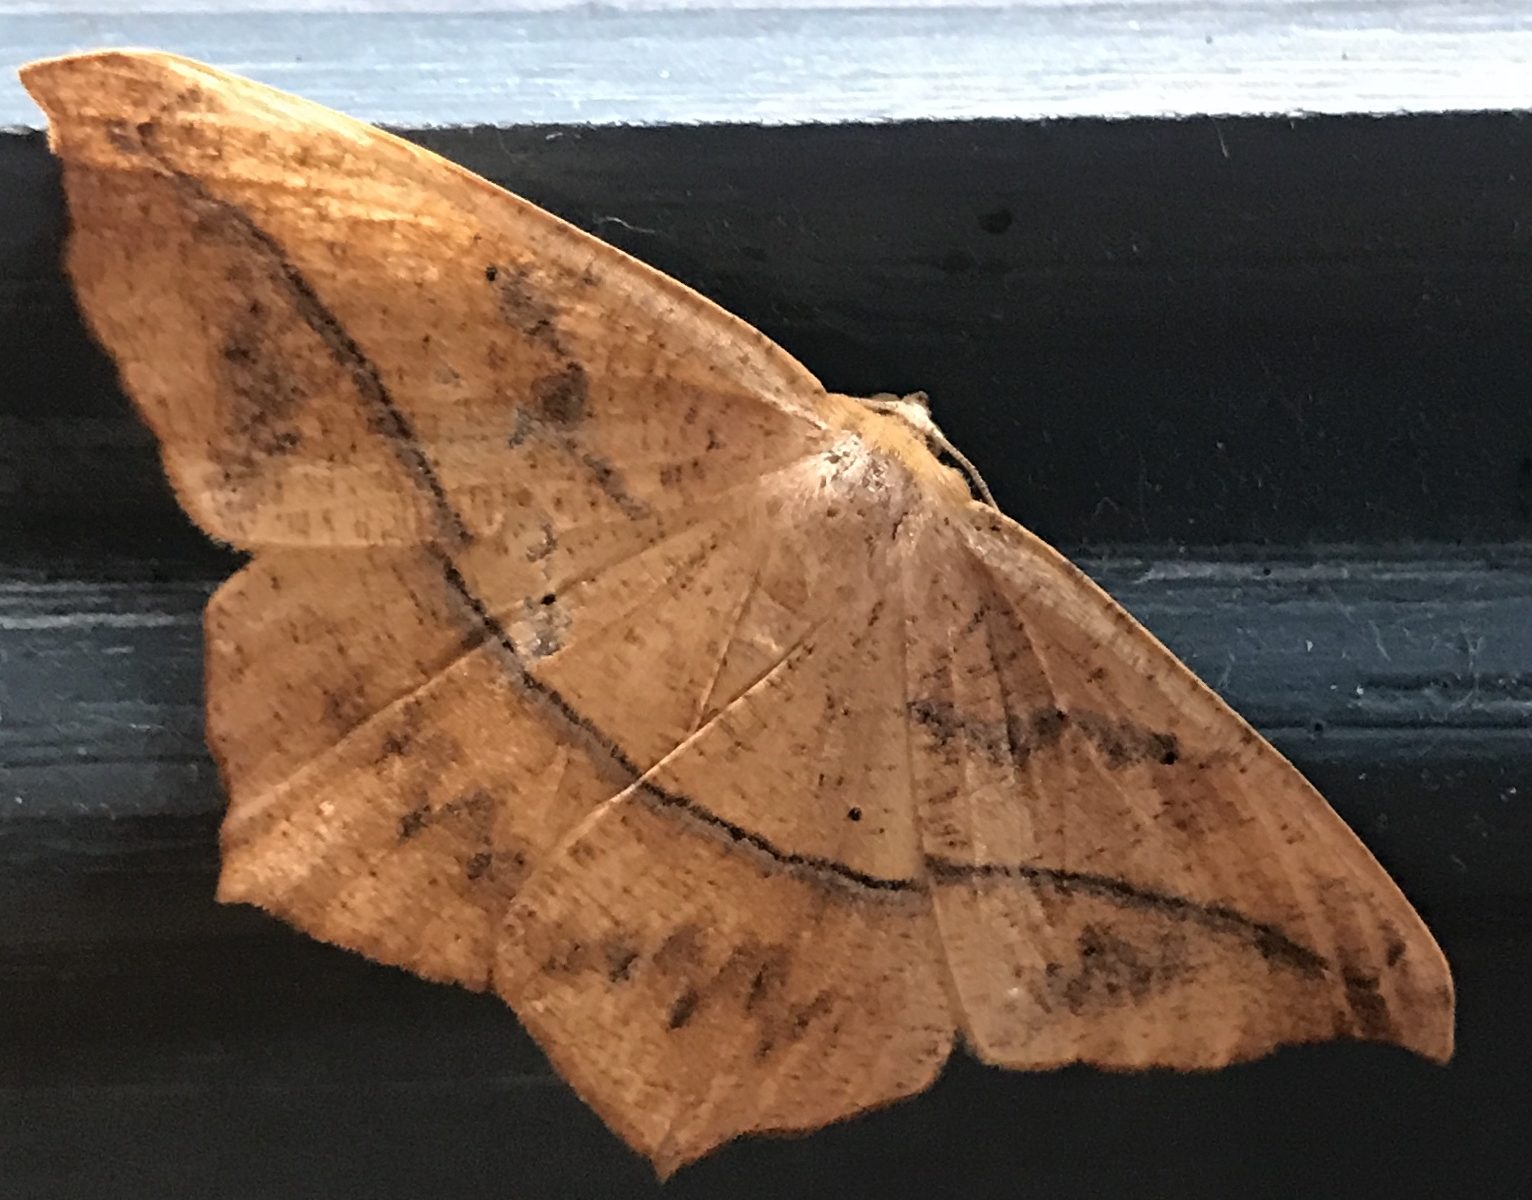 Brown moth with one dark band across wings.